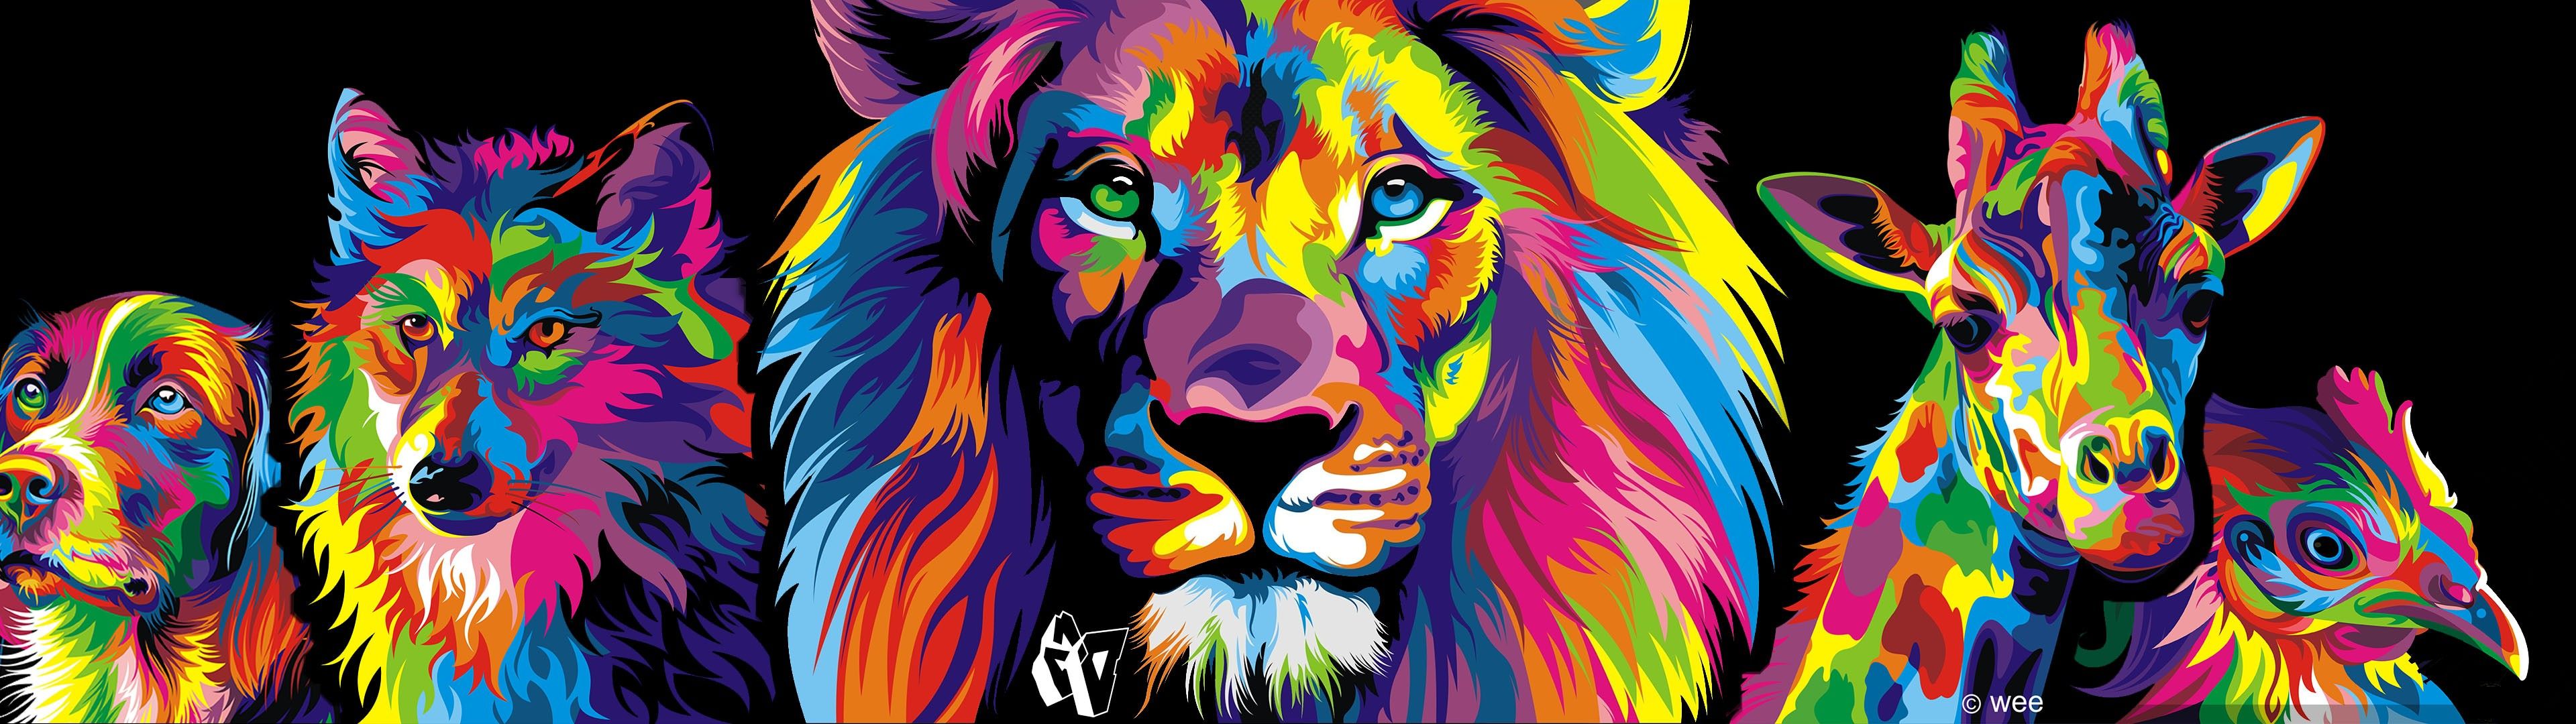 Colorful Lion Wallpaper By .wallpapertip.com